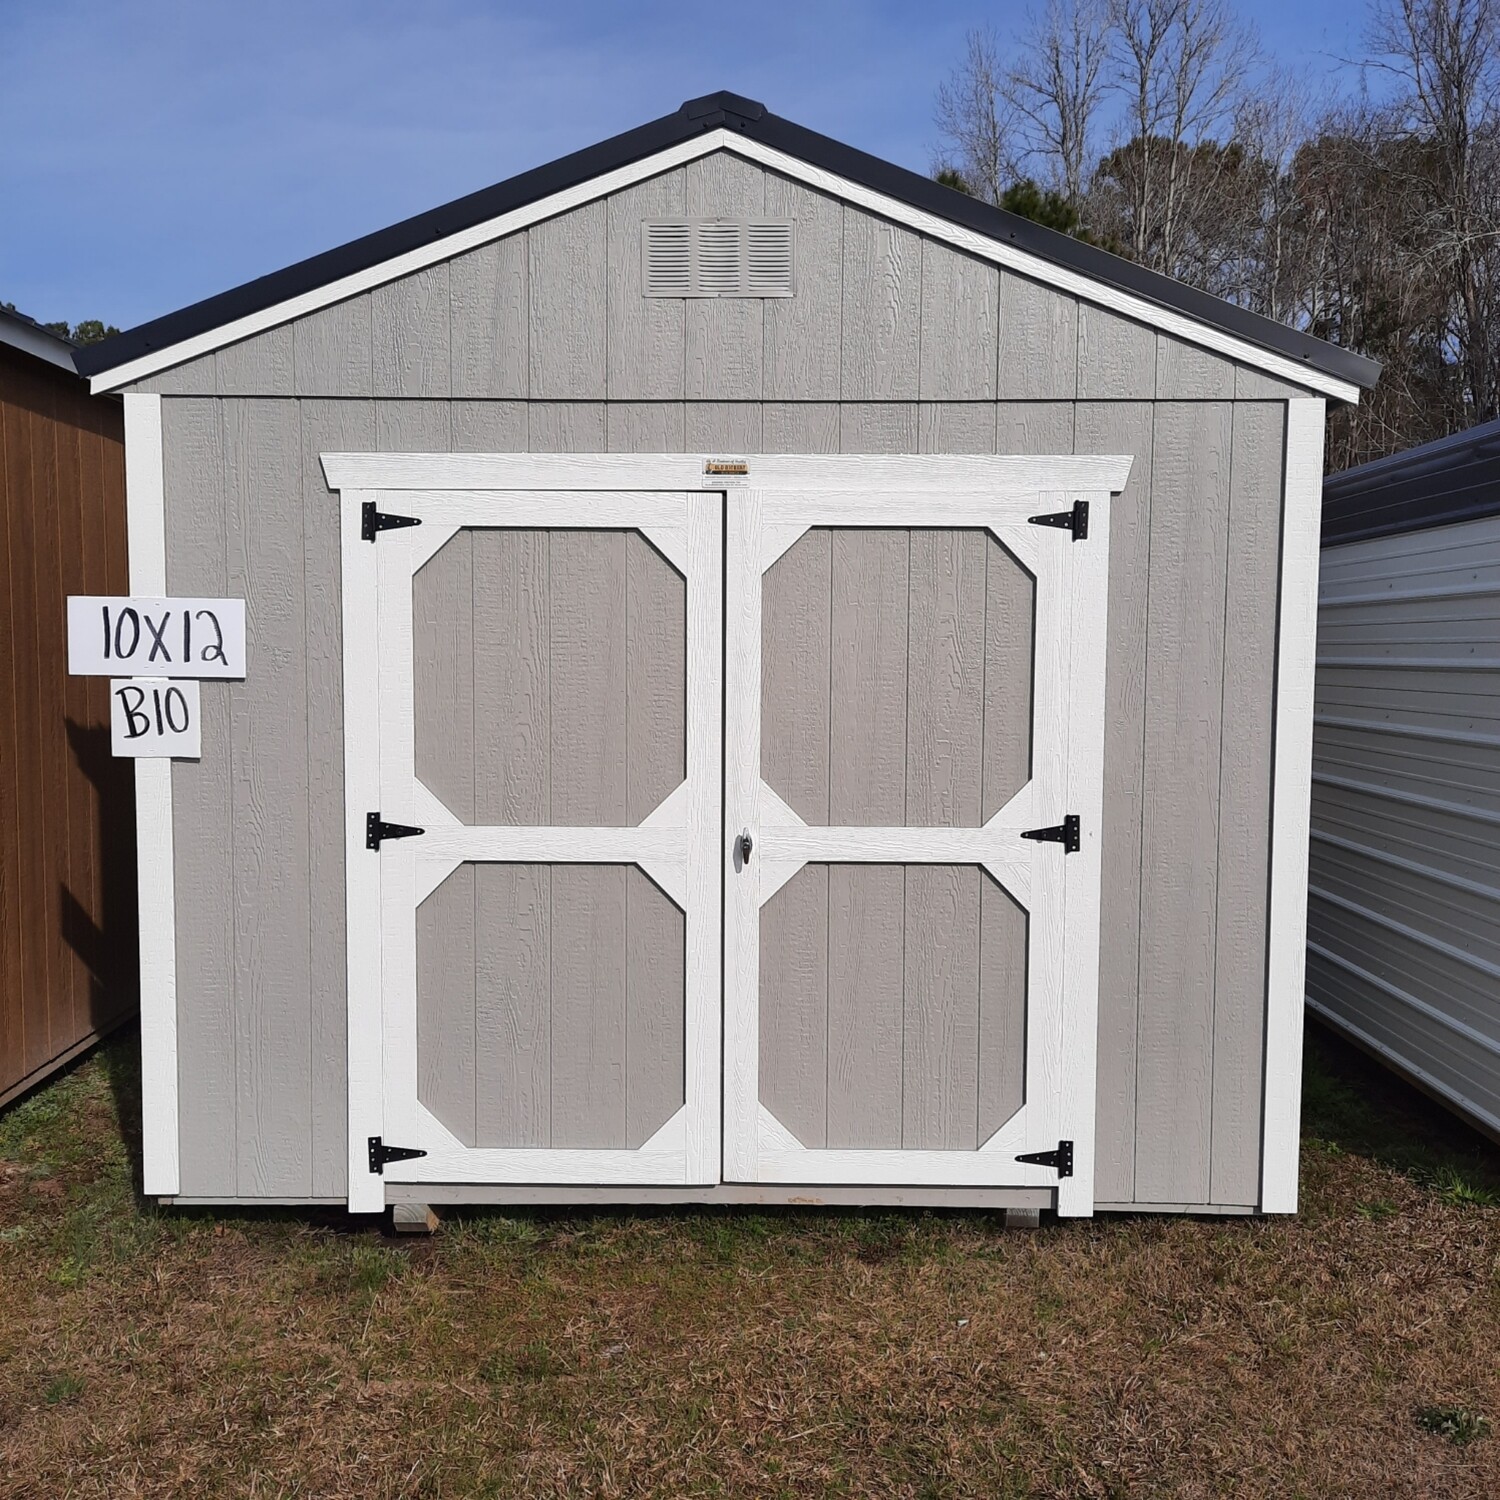 10x12 Utility Shed - Front Entrance